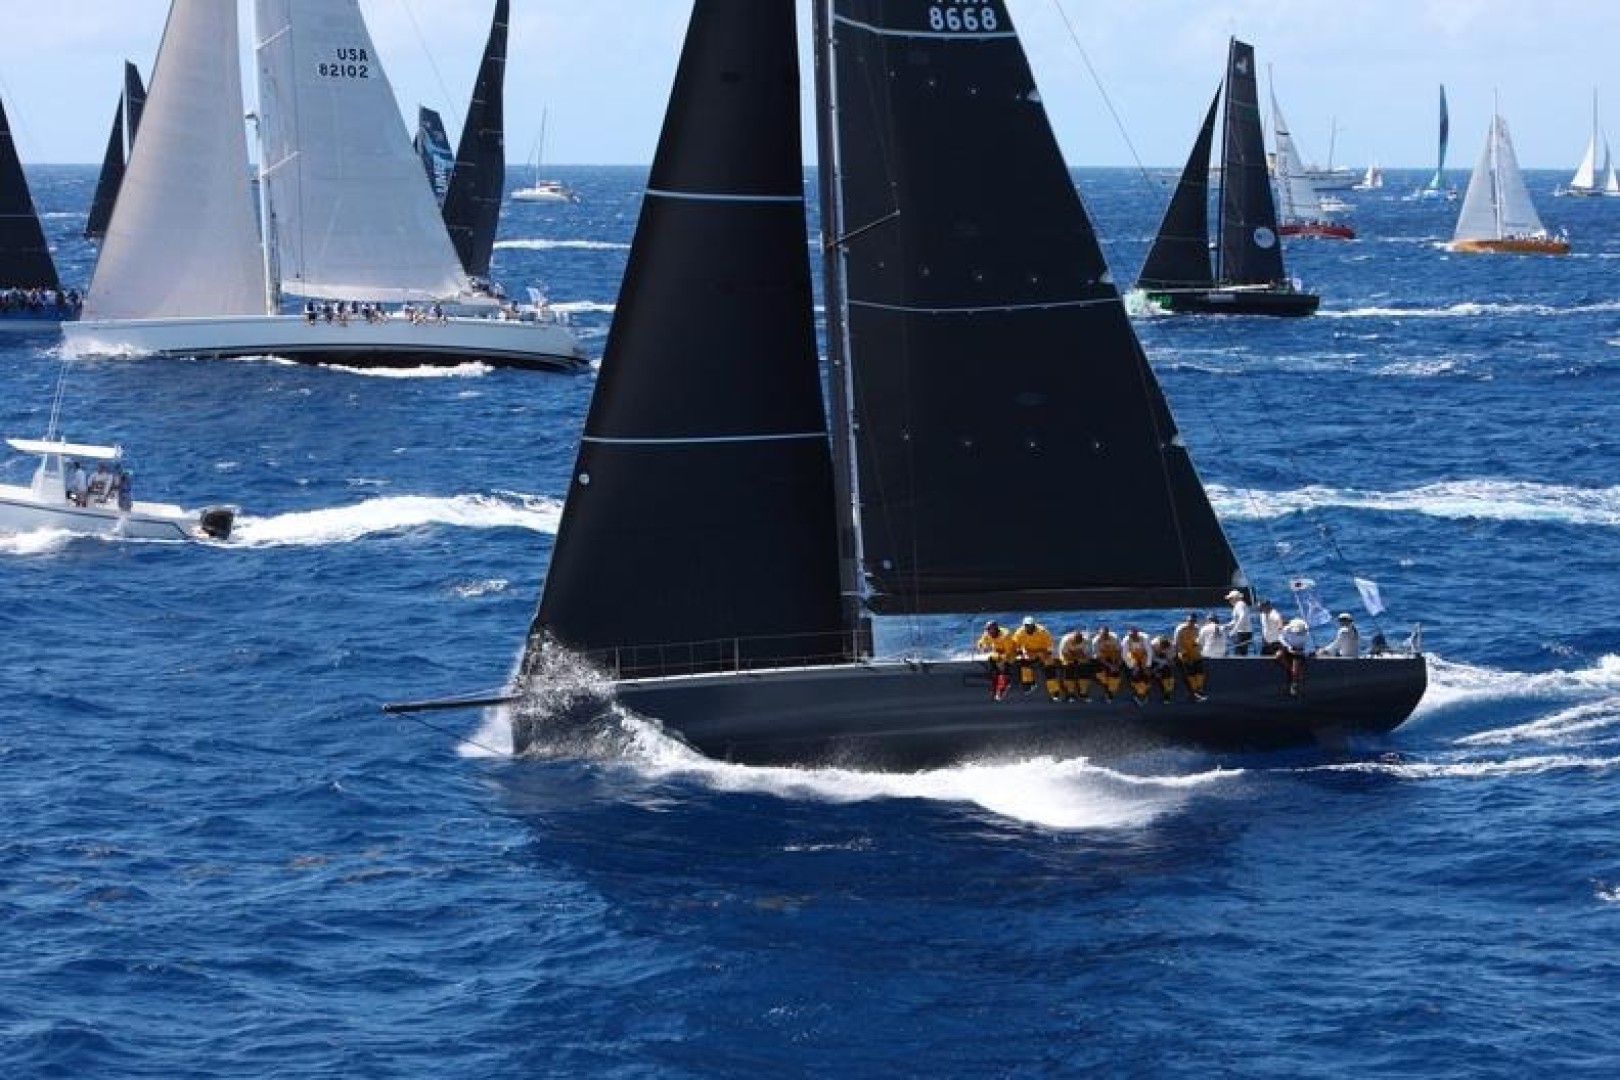 A huge variety of raceboats will be racing under the IRC Rating Rule to decide class and the overall winner of the inaugural Nelson's Cup Series.

Shown here - Eric de Turckheim's NMD54 Teasing Machine © Tim Wright/Photoaction.com